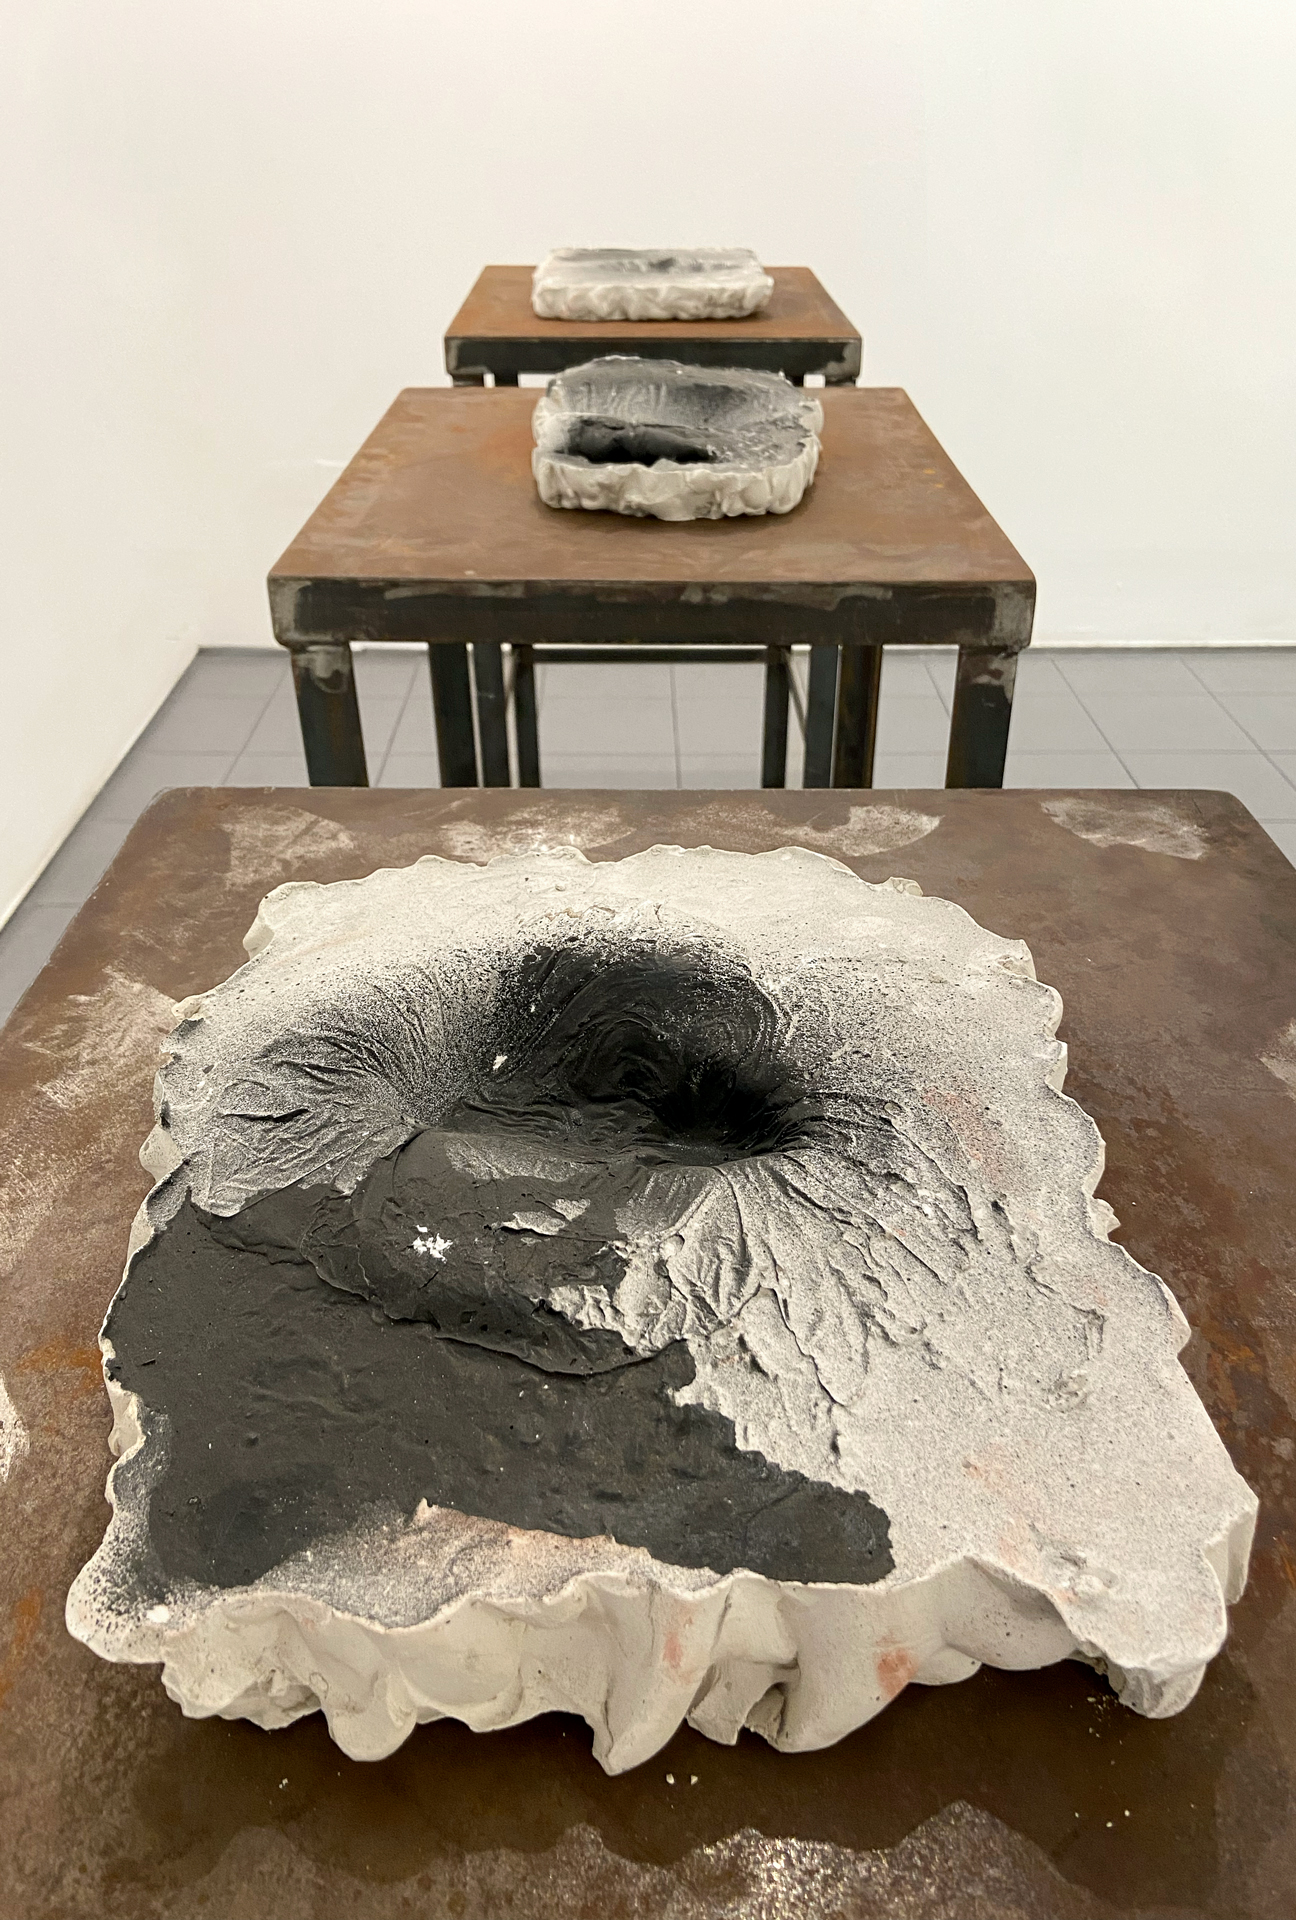 Moshe Gershuni in corporation with Daniel Silver, Untitled (3), 2006, oil on Japanese synthetic plaster